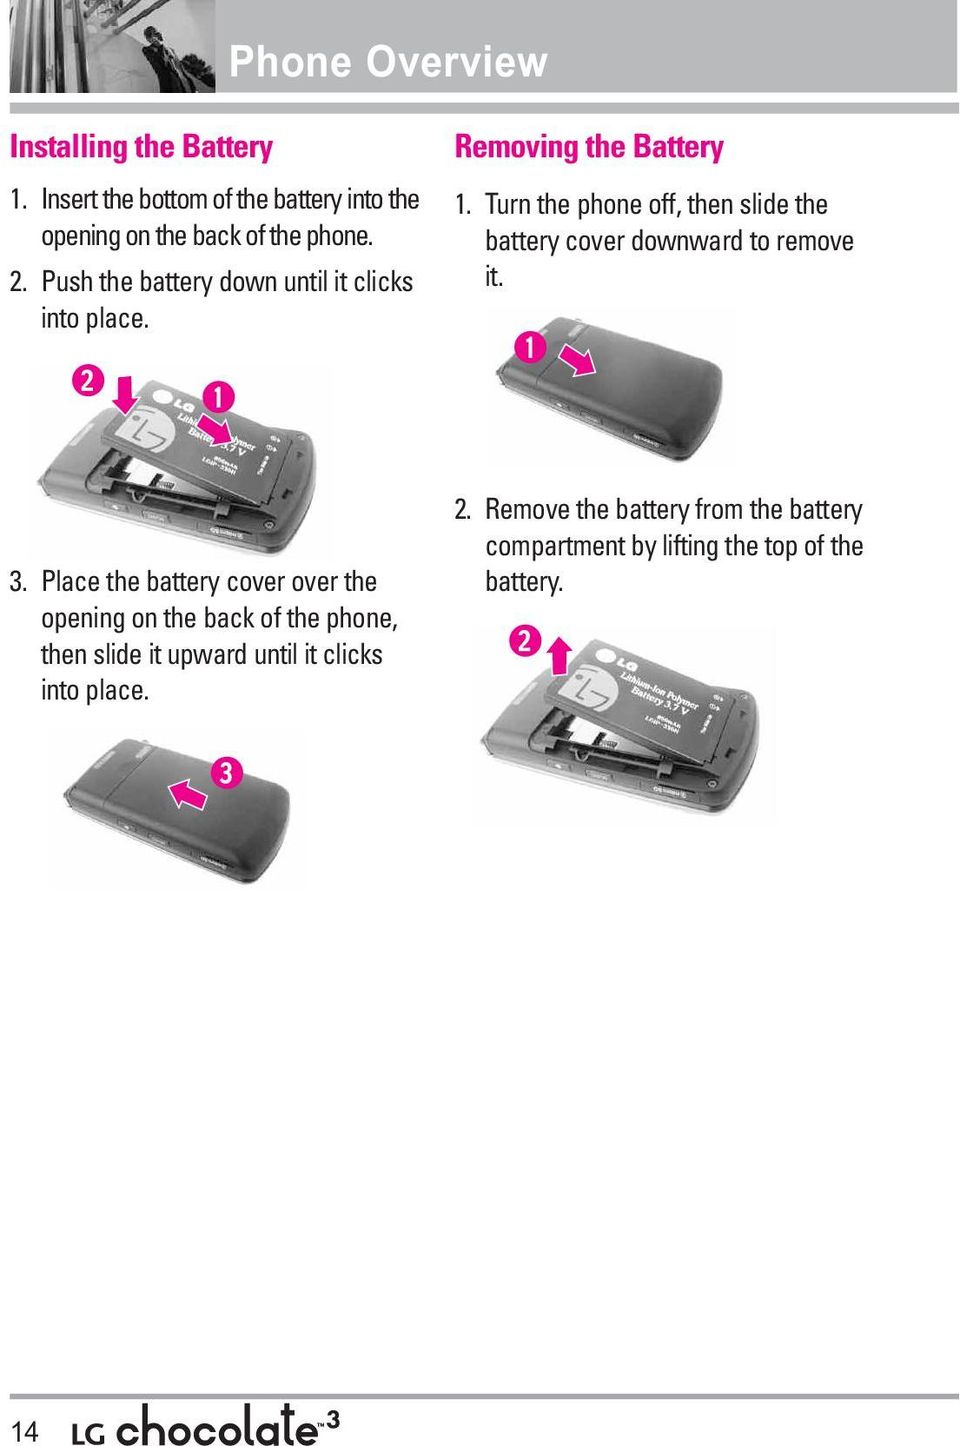 Turn the phone off, then slide the battery cover downward to remove it. 3.